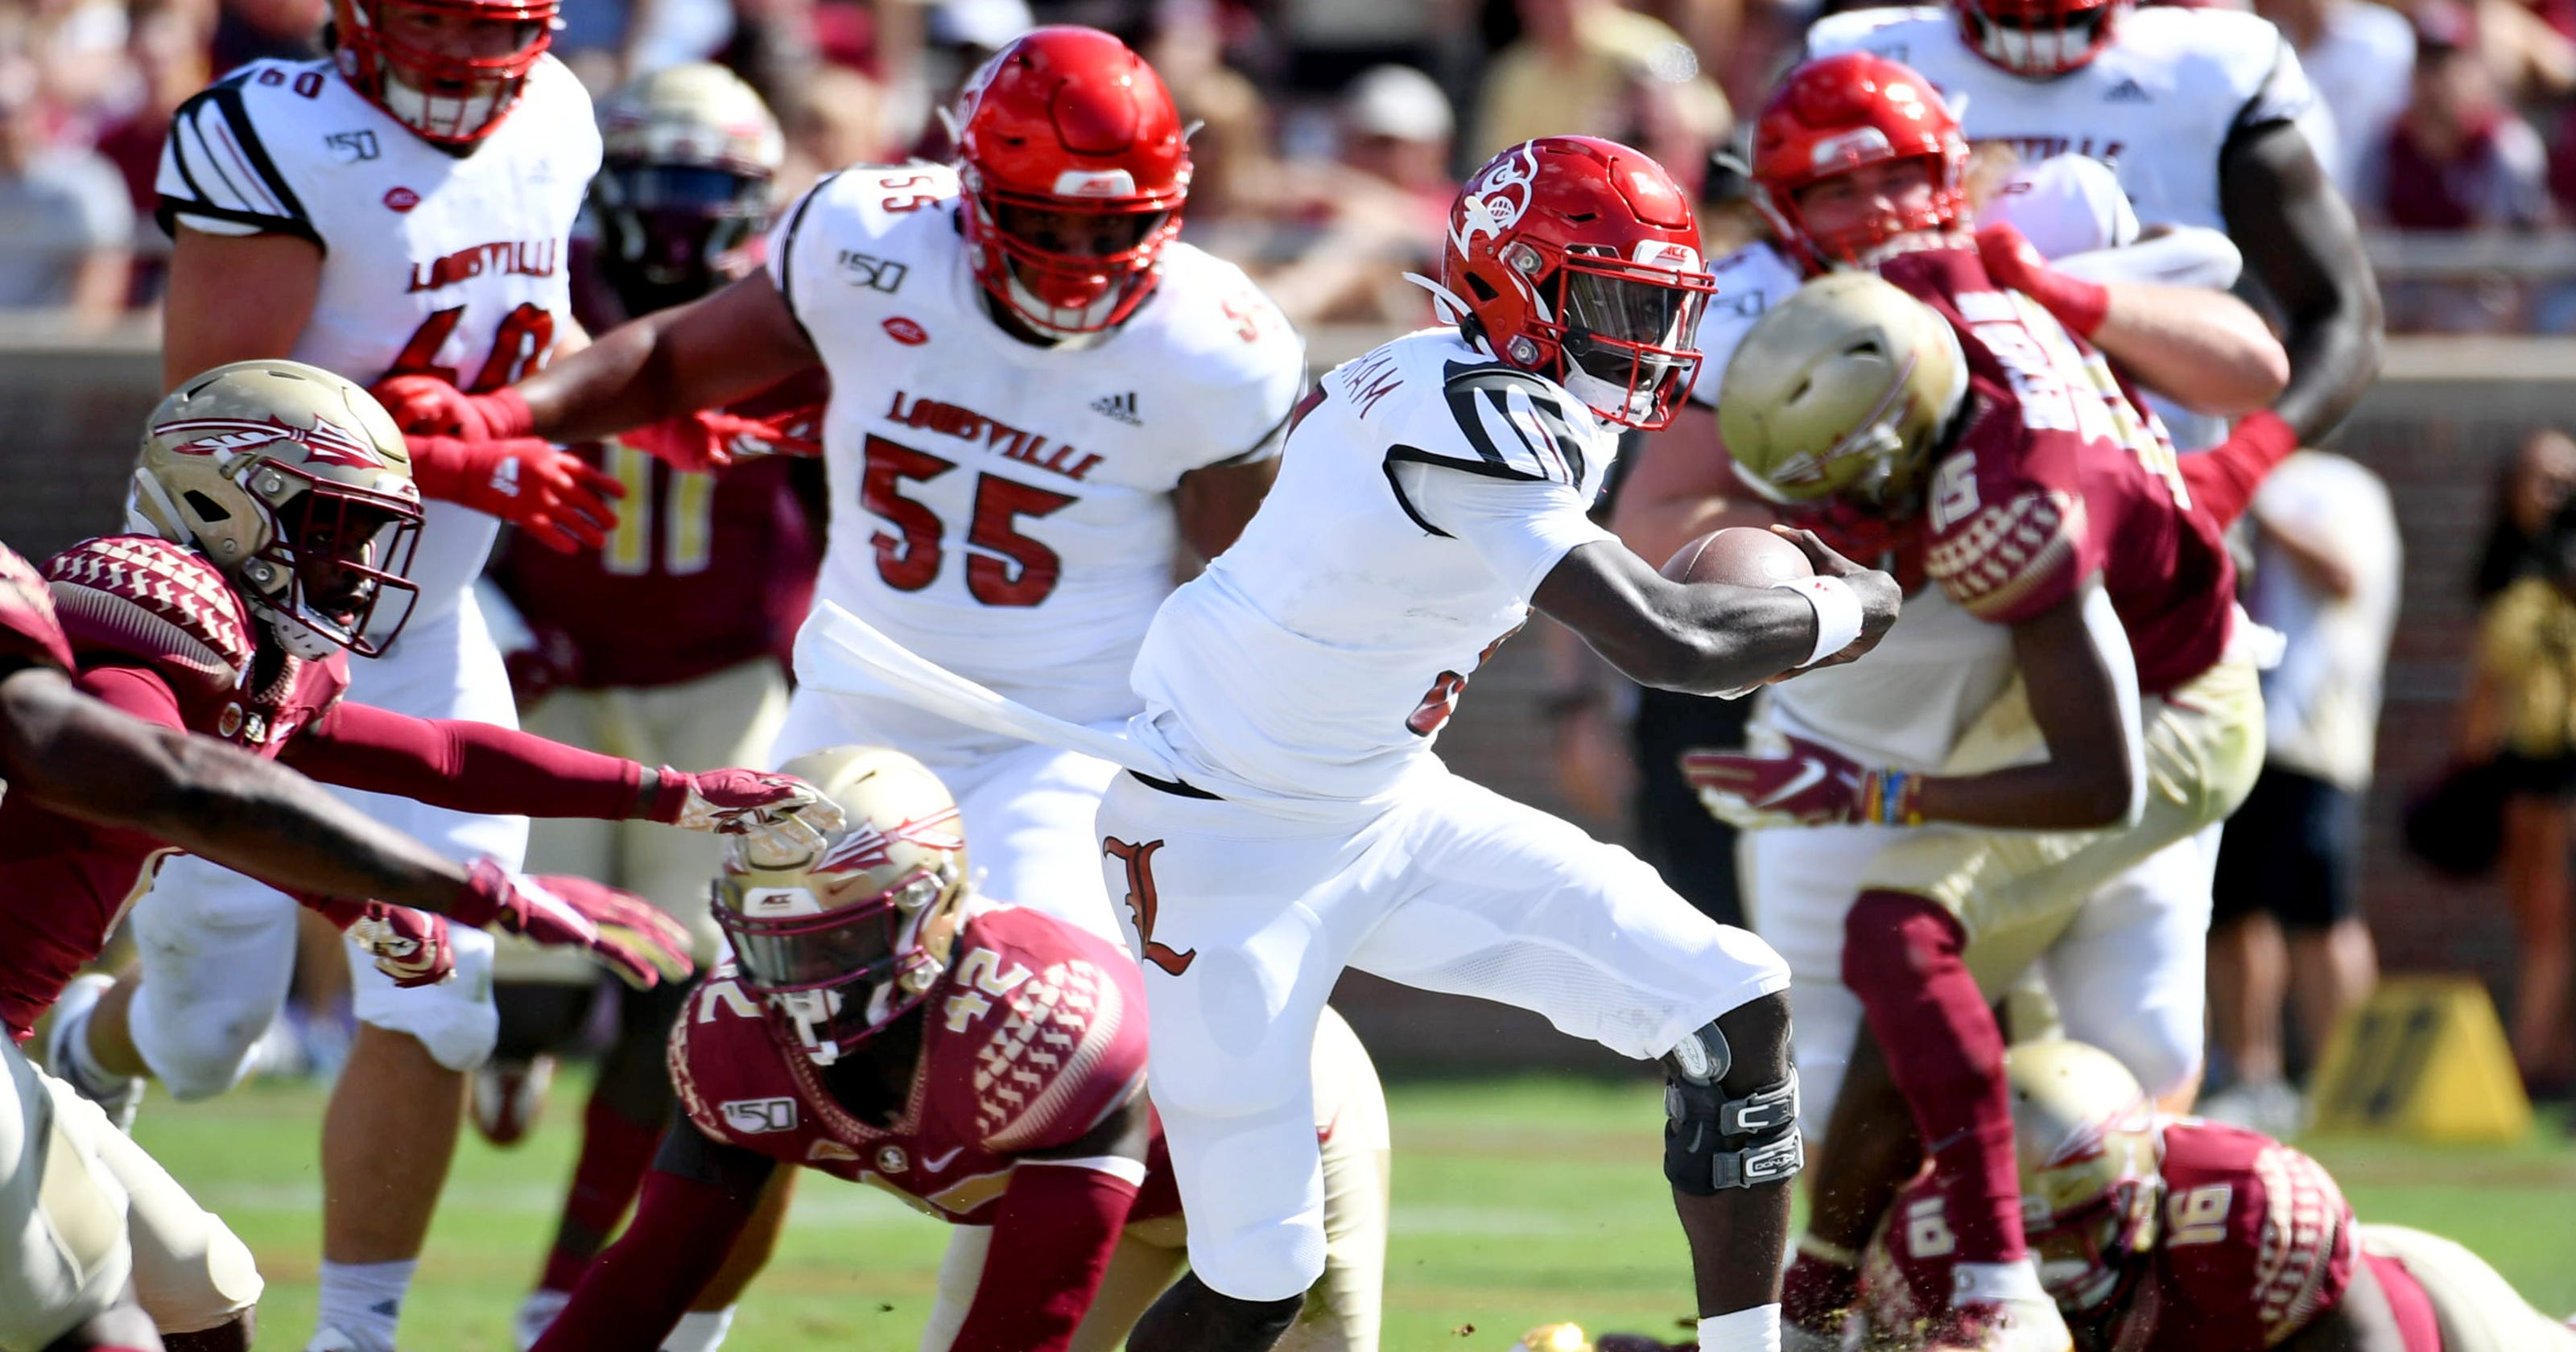 Louisville football vs Florida State: Live updates, score in ACC game